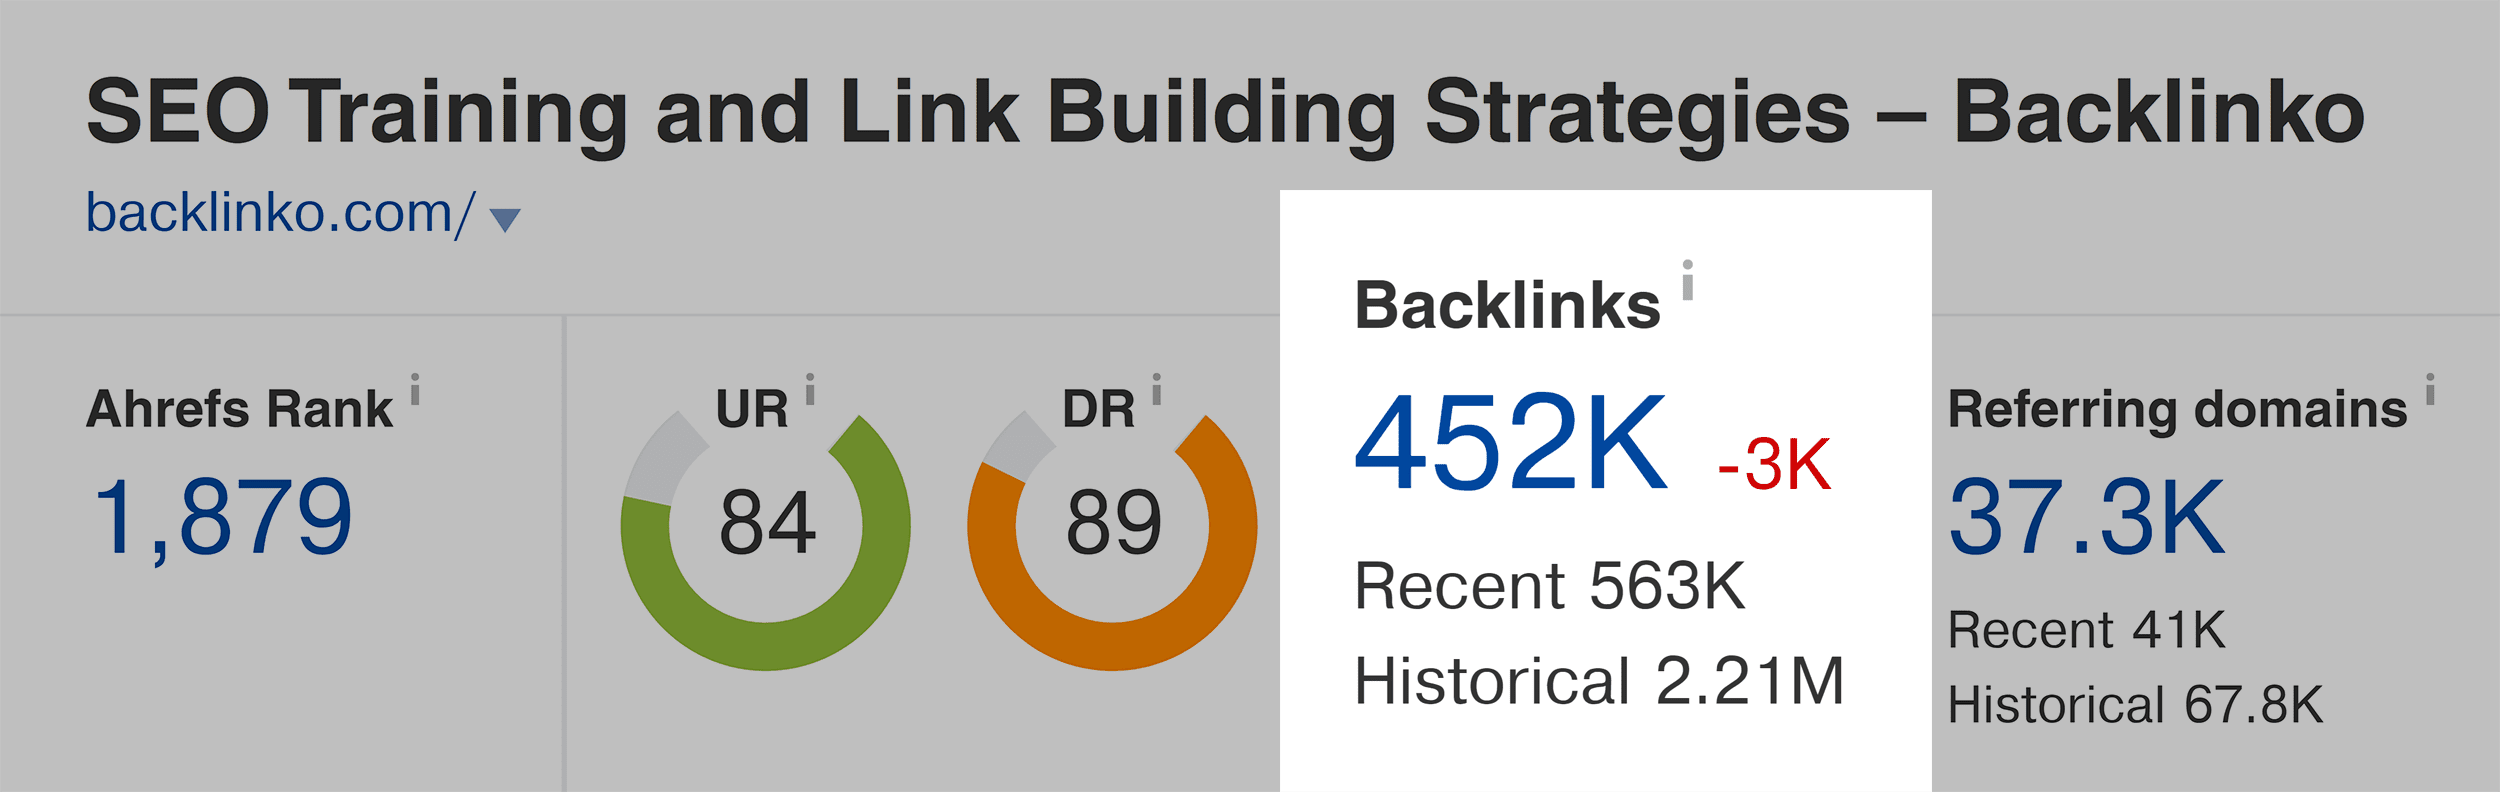 Building quality backlinks to boost rankings